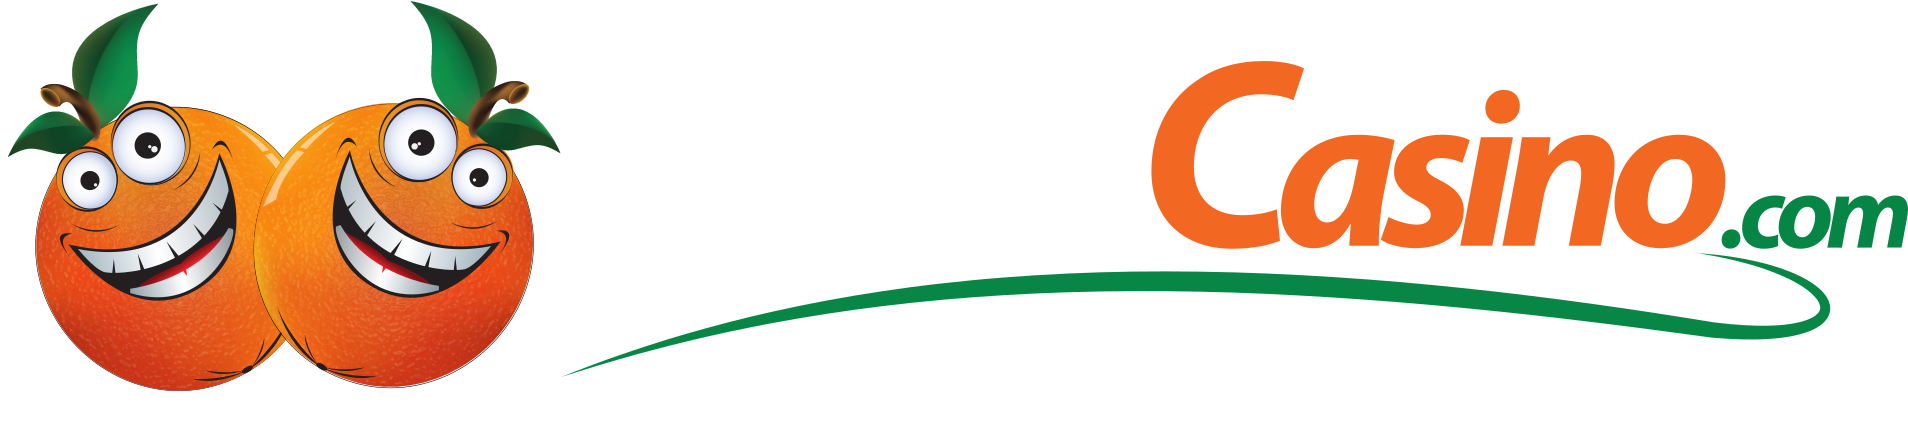 Casino as One of the New On-line Casinos with no deposit bonuses